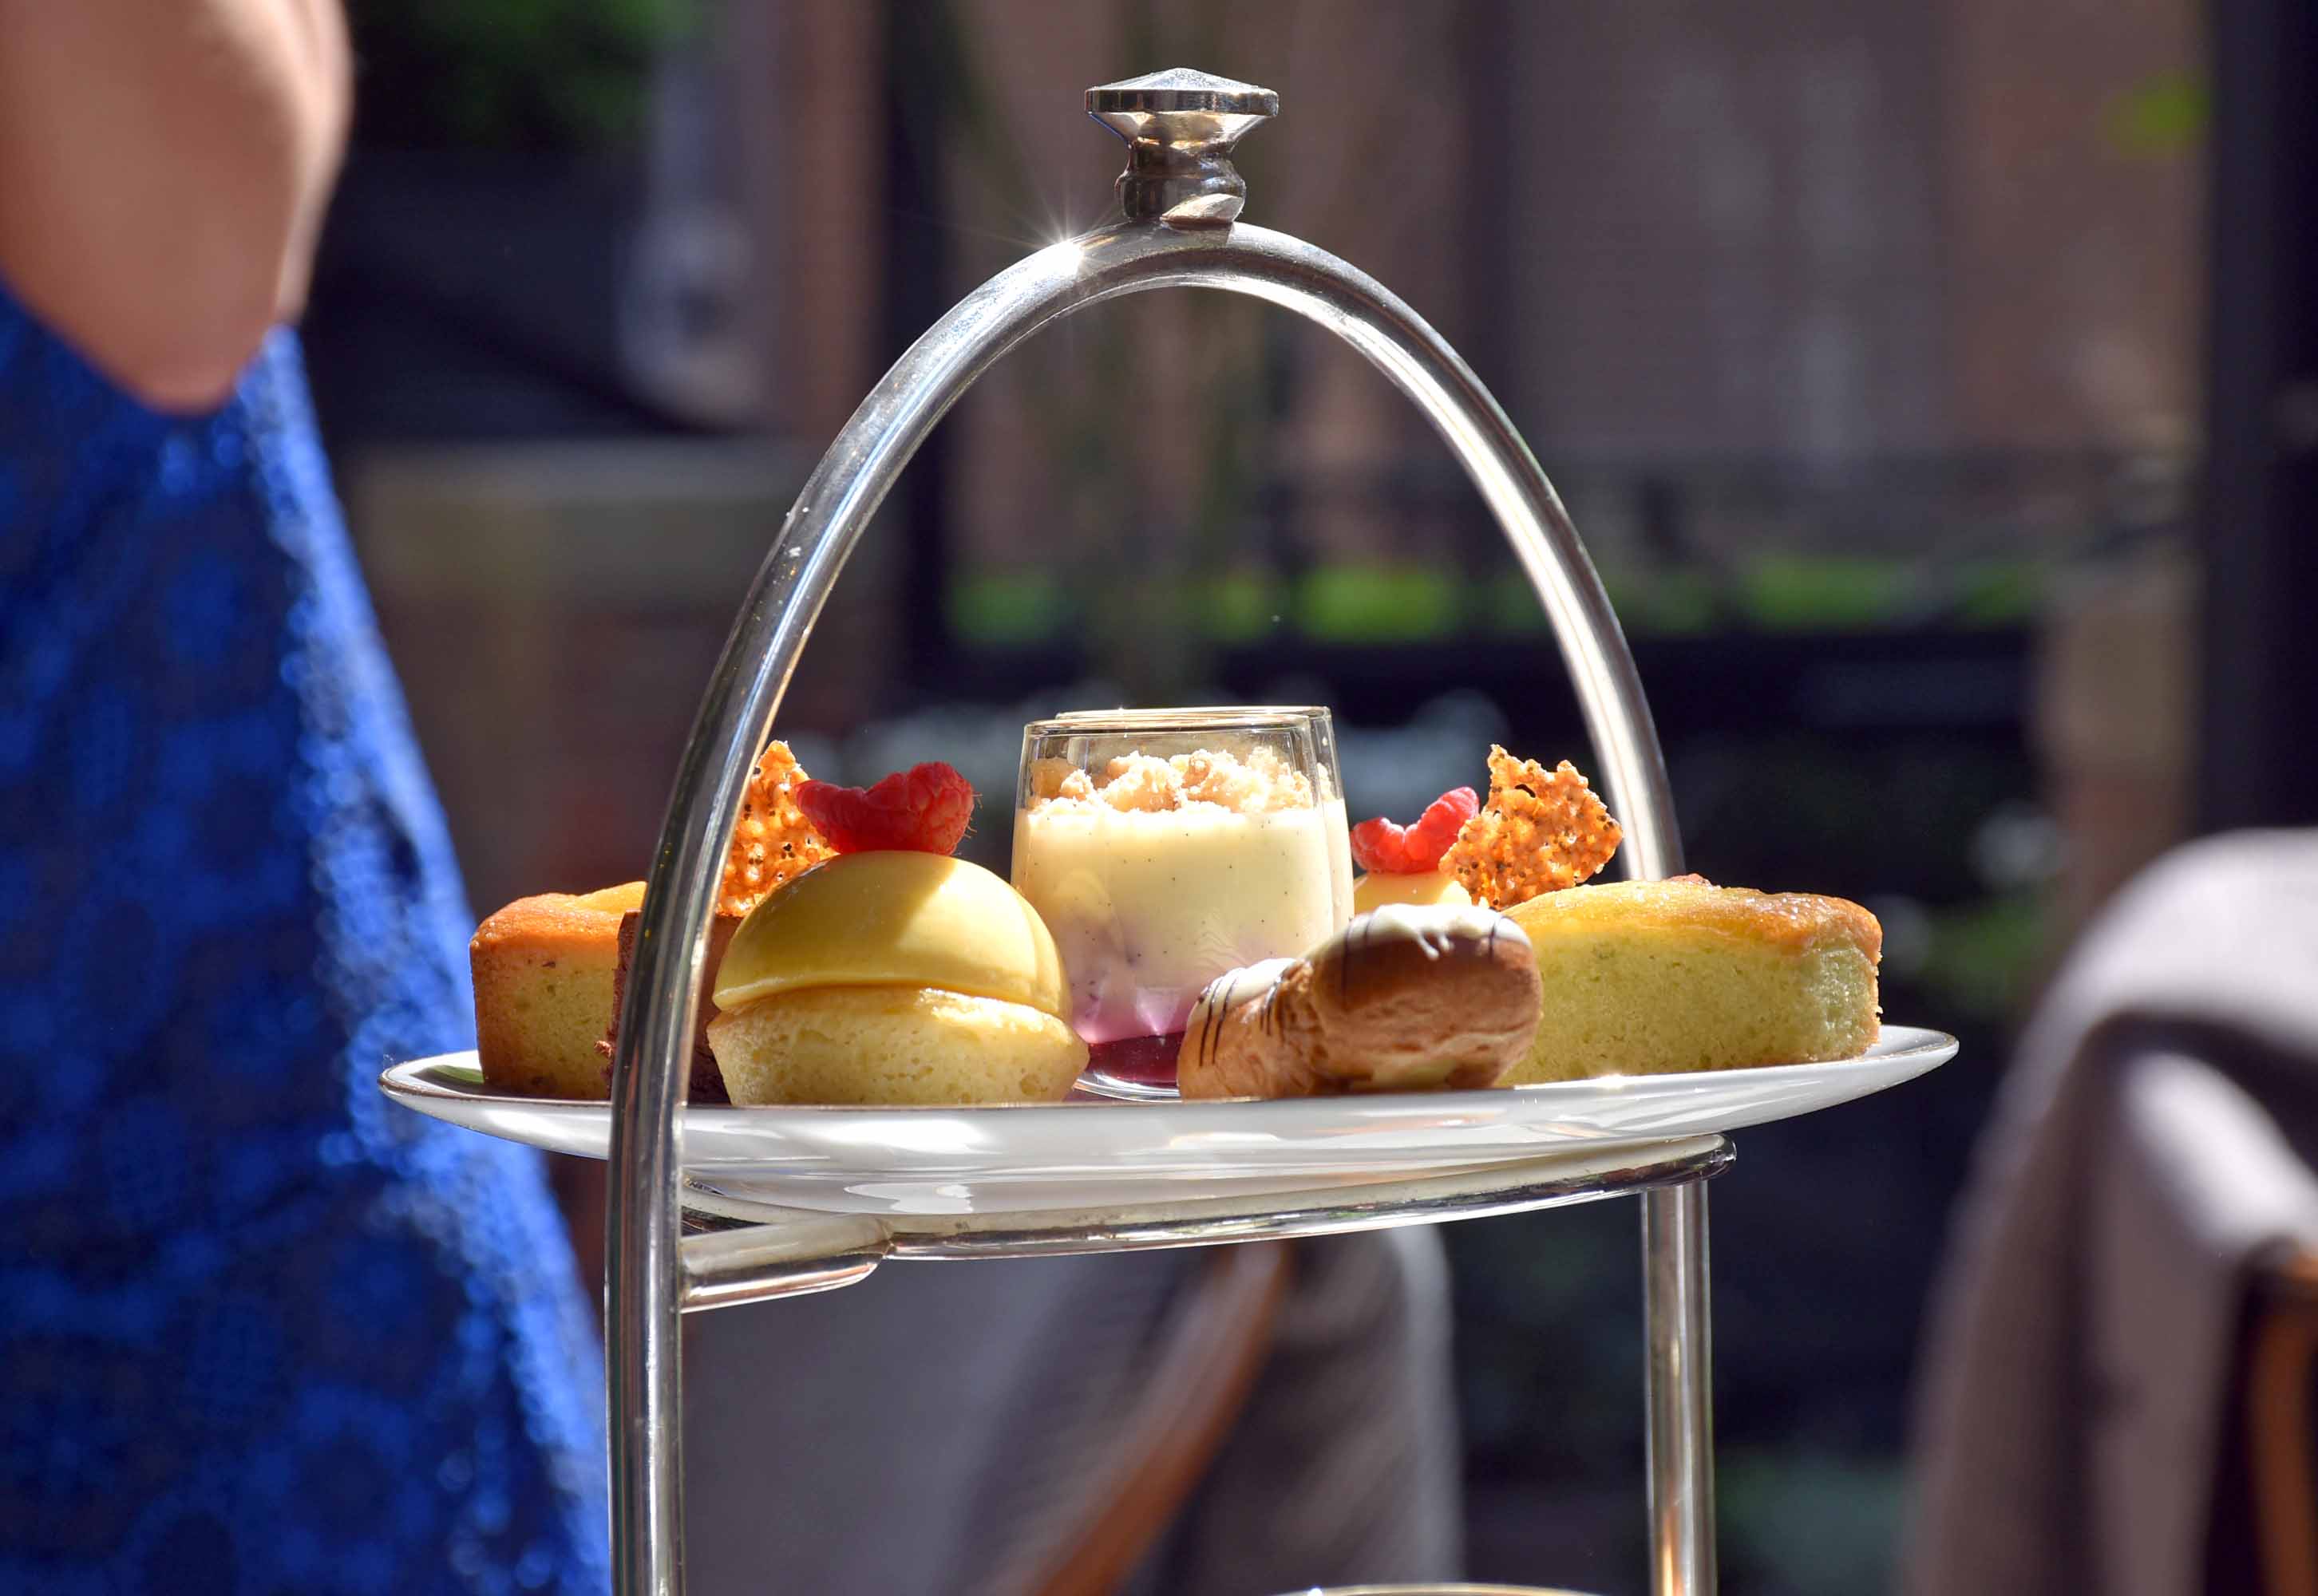 Afternoon Tea at Dalloway Terrace: A Bloggers Delight in Bloomsbury